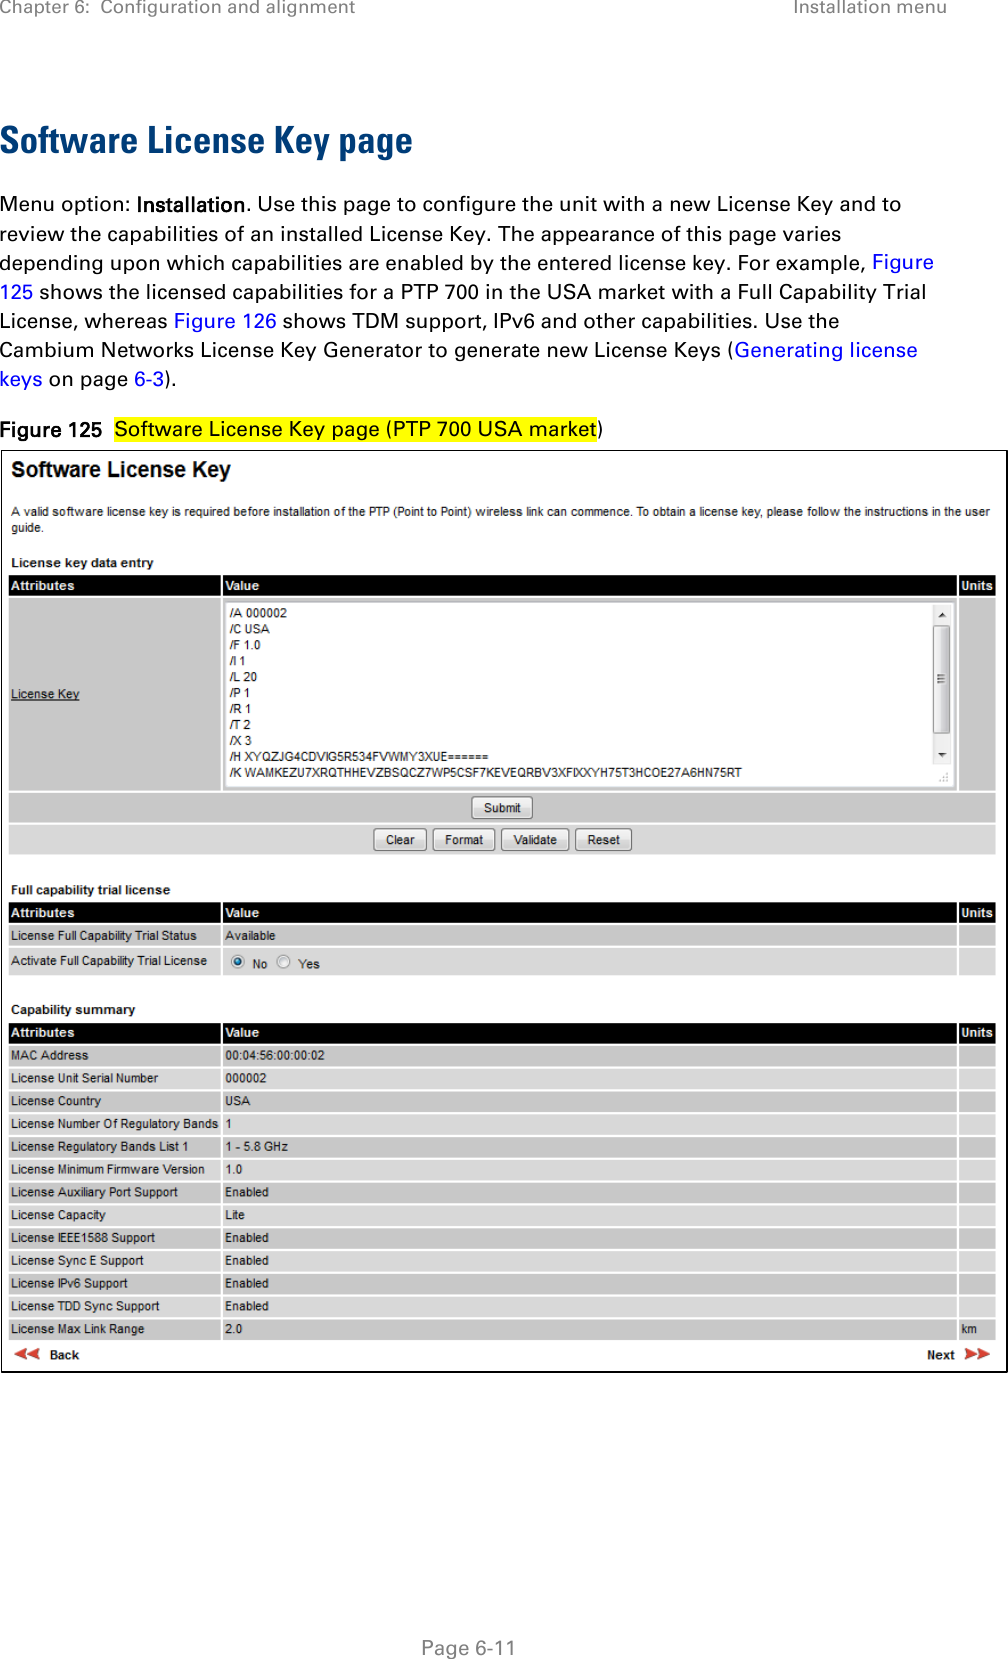 Chapter 6:  Configuration and alignment Installation menu  Software License Key page Menu option: Installation. Use this page to configure the unit with a new License Key and to review the capabilities of an installed License Key. The appearance of this page varies depending upon which capabilities are enabled by the entered license key. For example, Figure 125 shows the licensed capabilities for a PTP 700 in the USA market with a Full Capability Trial License, whereas Figure 126 shows TDM support, IPv6 and other capabilities. Use the Cambium Networks License Key Generator to generate new License Keys (Generating license keys on page 6-3). Figure 125  Software License Key page (PTP 700 USA market)    Page 6-11 